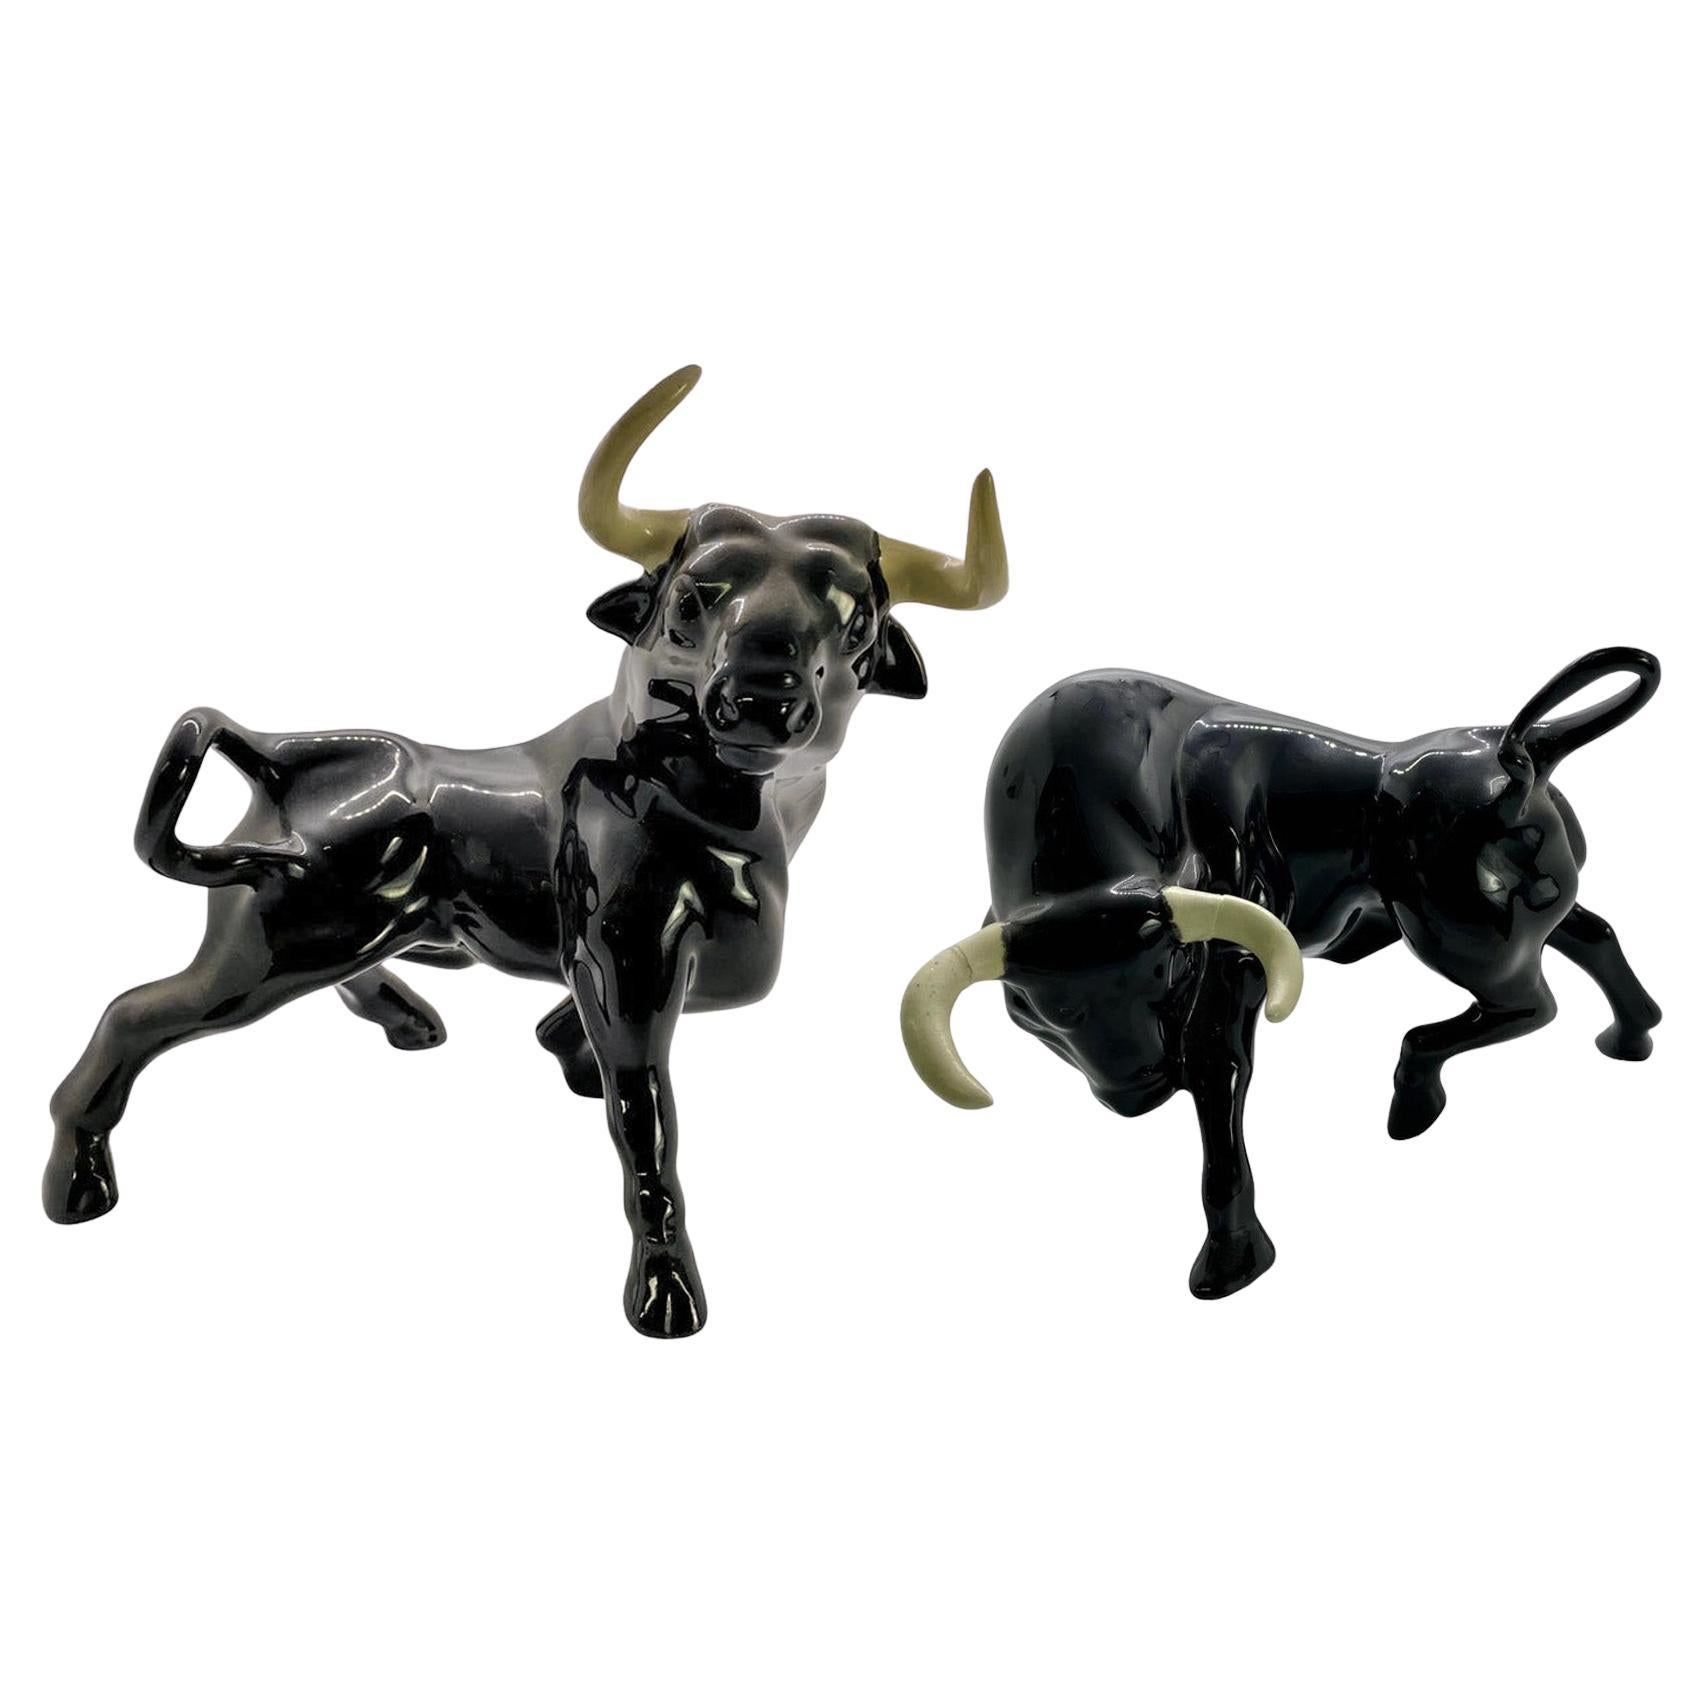 1950's Ceramic Black Bull Figurine with White Horns, a Pair  For Sale